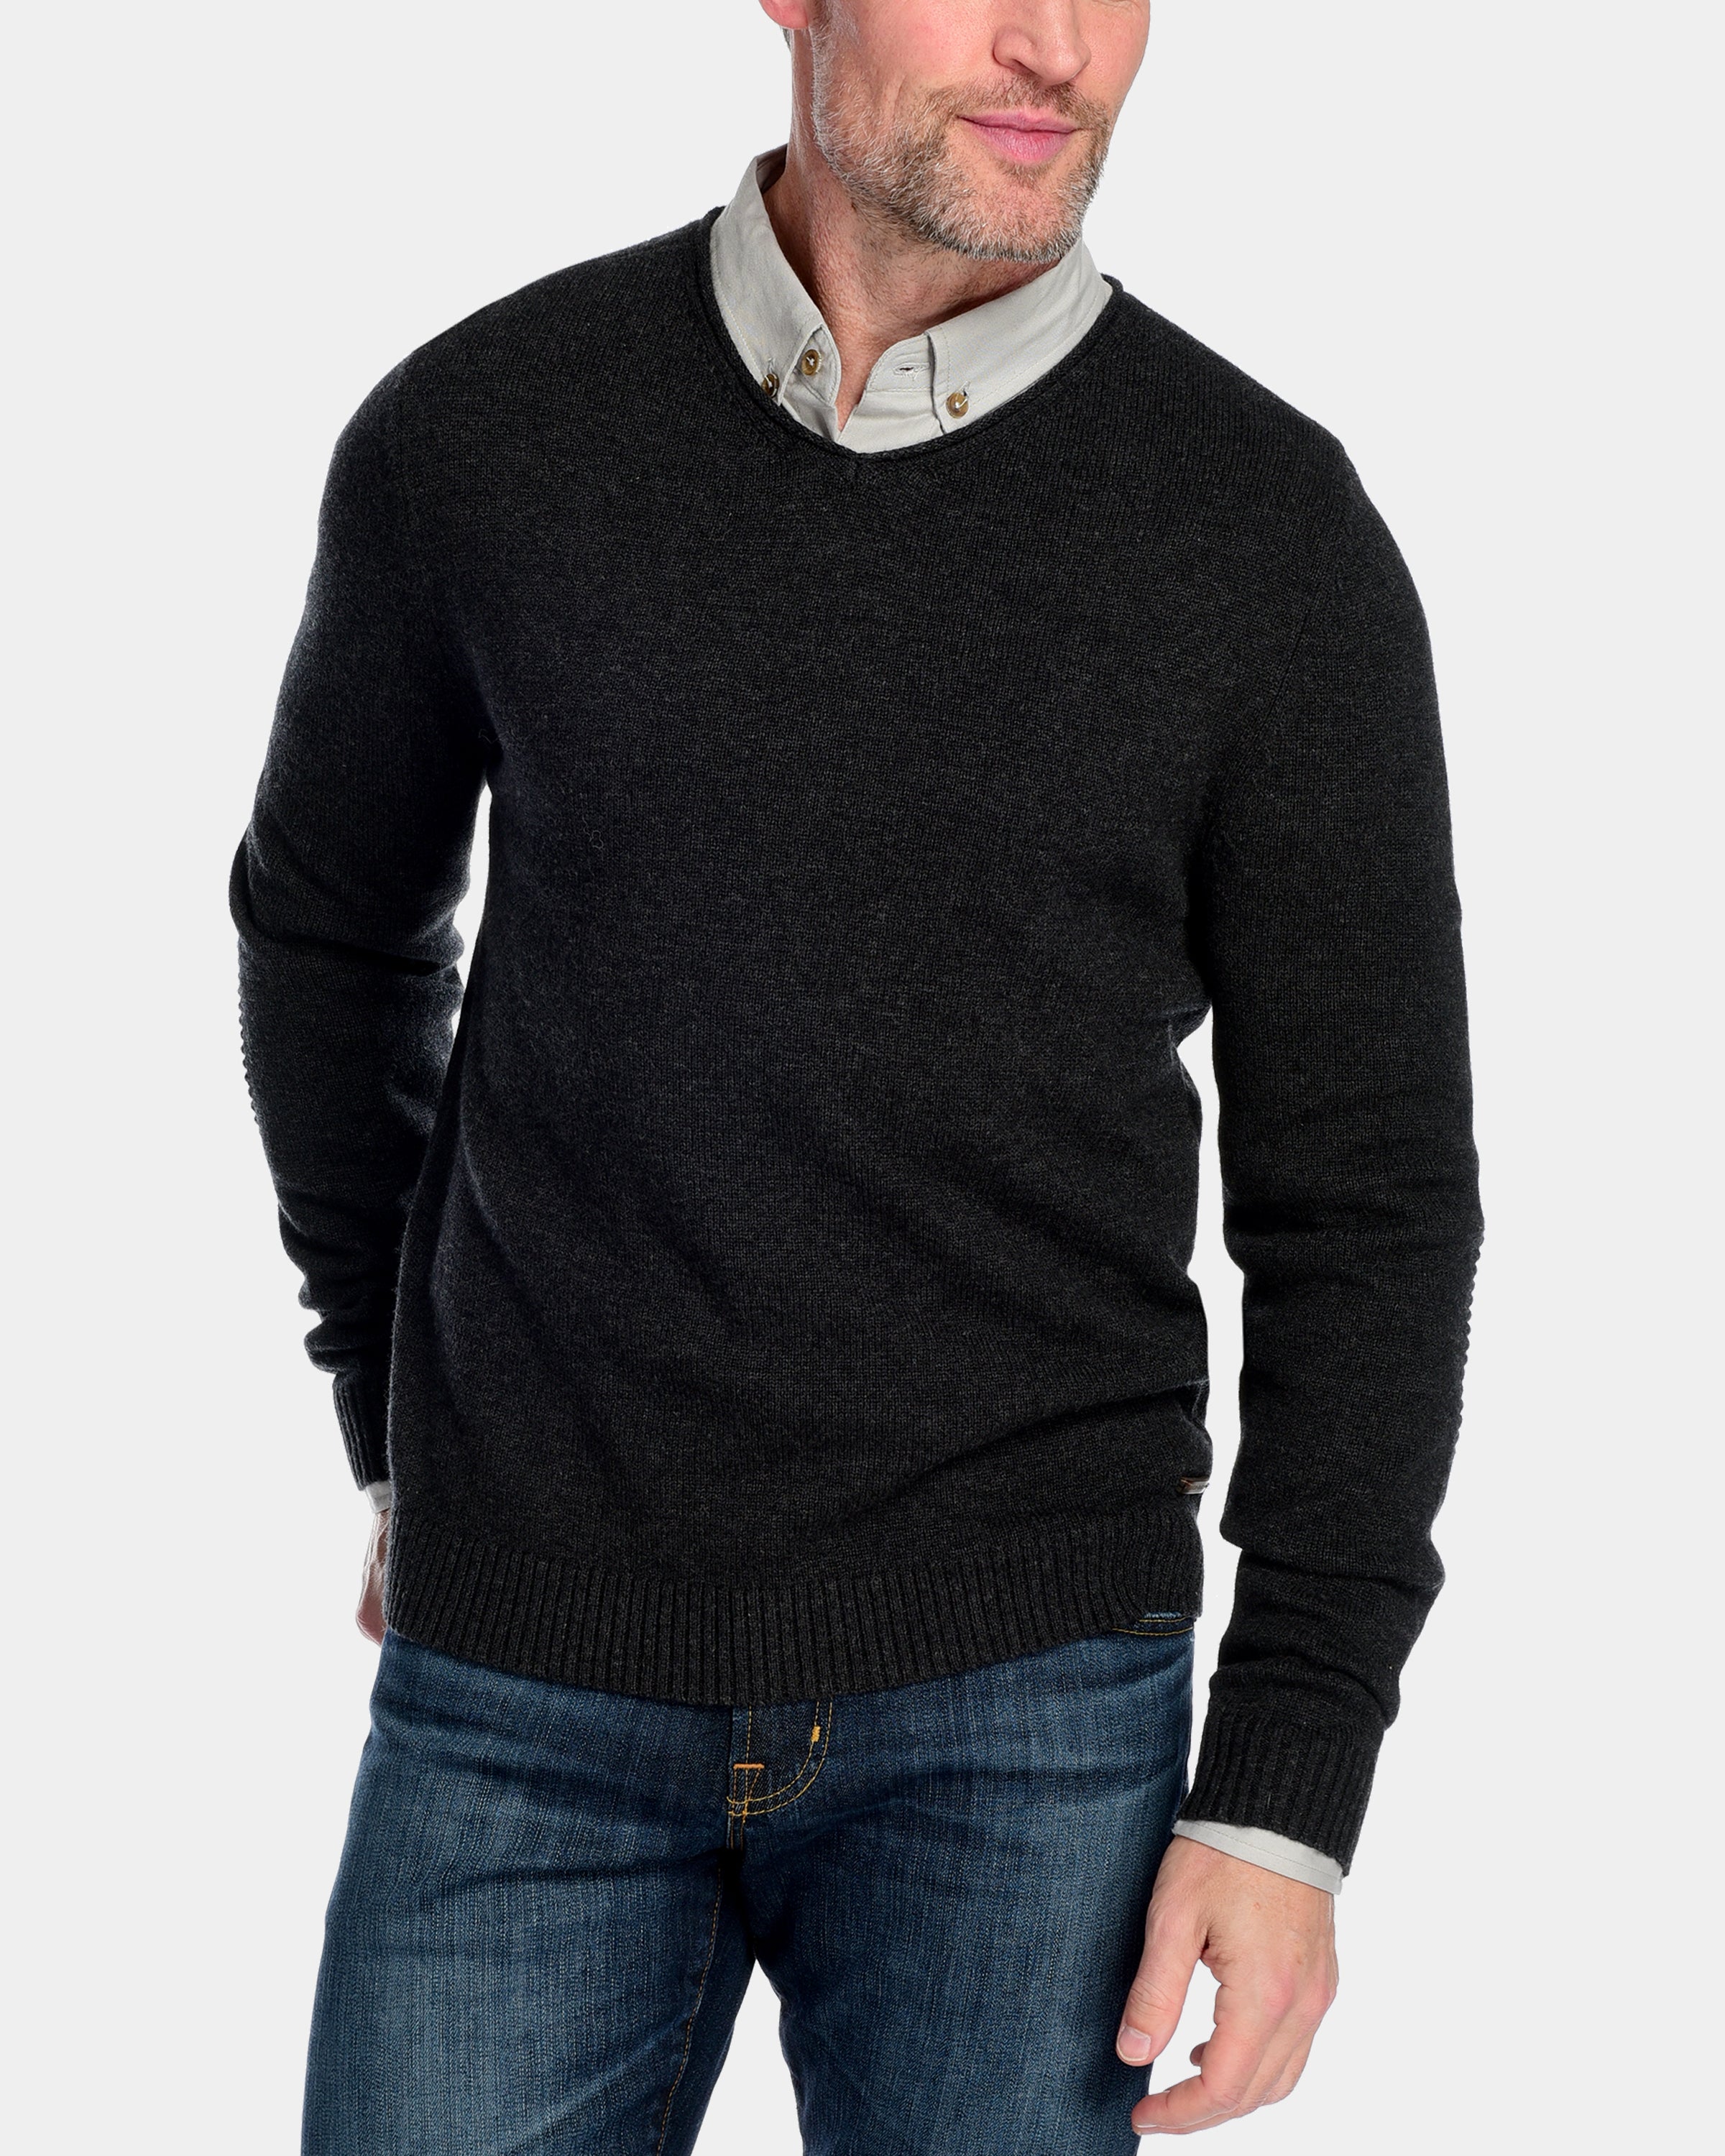 Men's V-Neck Sweater the Wentworth V-Neck Sweater by Fisher + Baker